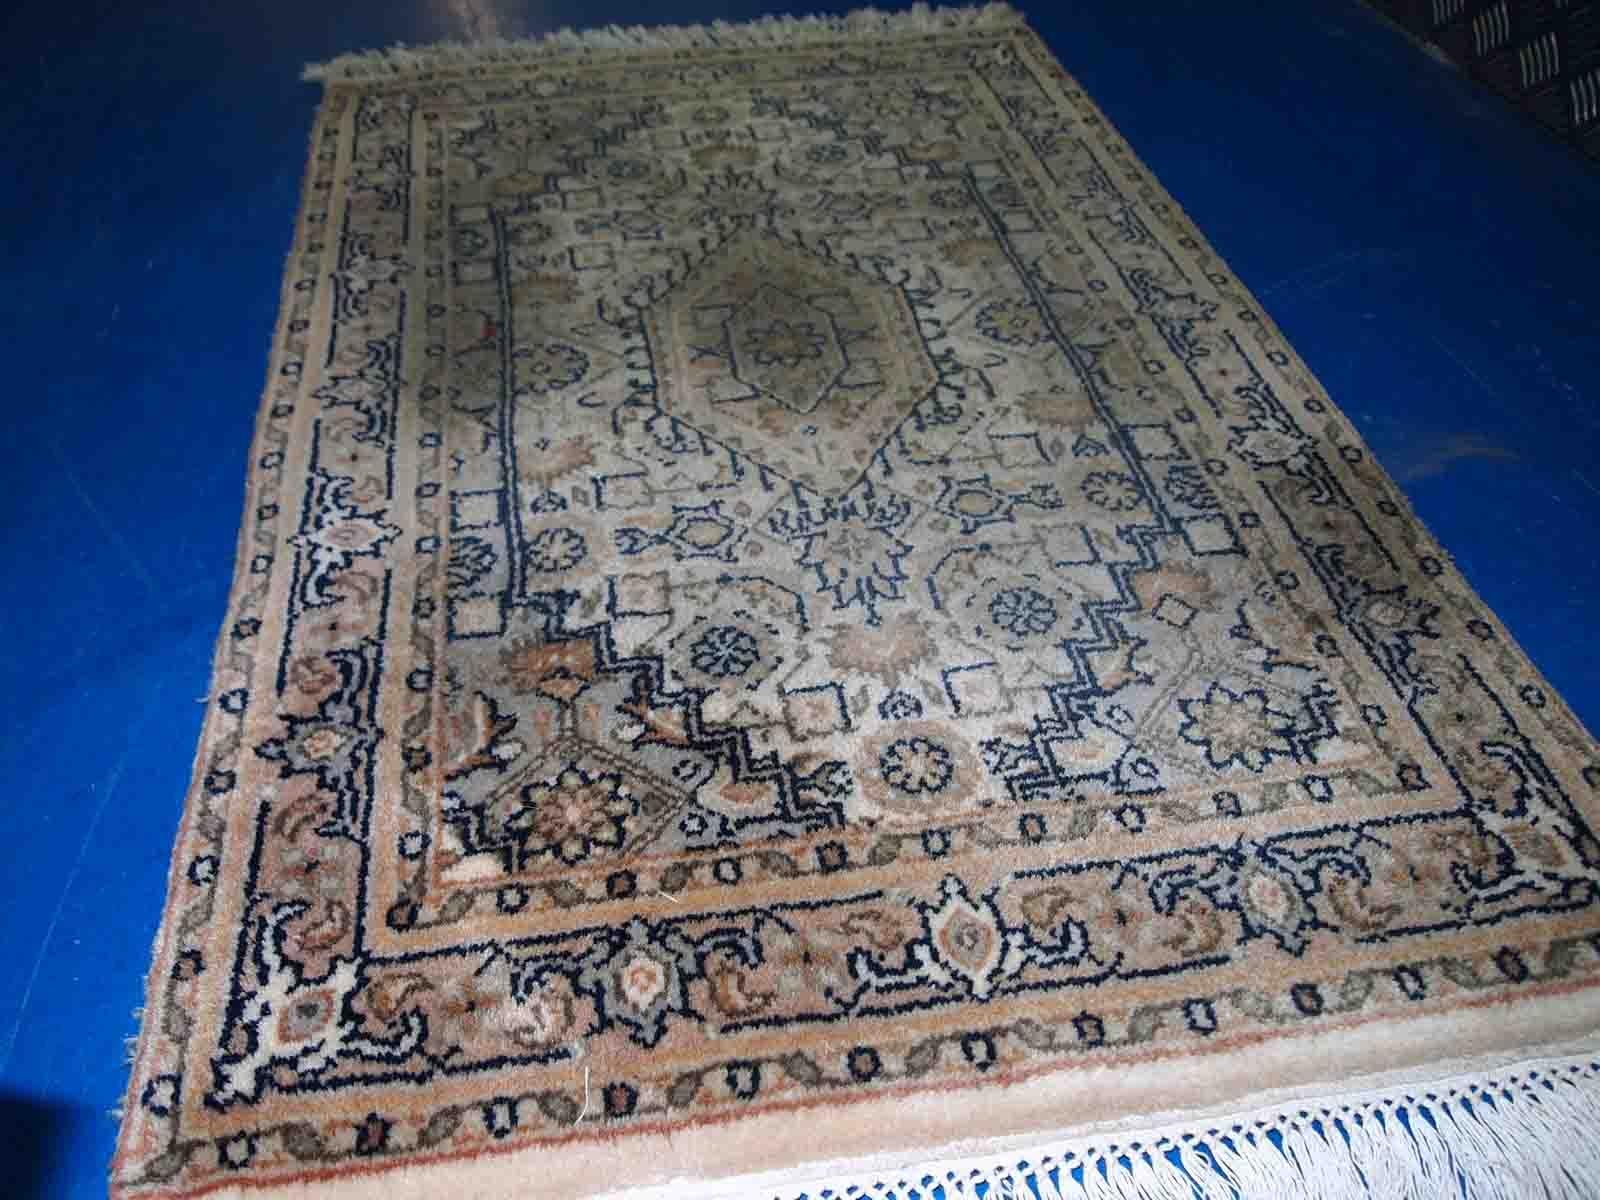 Vintage handmade Indo-Tabriz rug in original good condition. The rug is from the end of 20th century, made in wool.

-condition: original good, 

-circa: 1970s,

-size: 1.9' x 2.9' (58 cm x 89 cm),

-material: wool,

-country of origin: